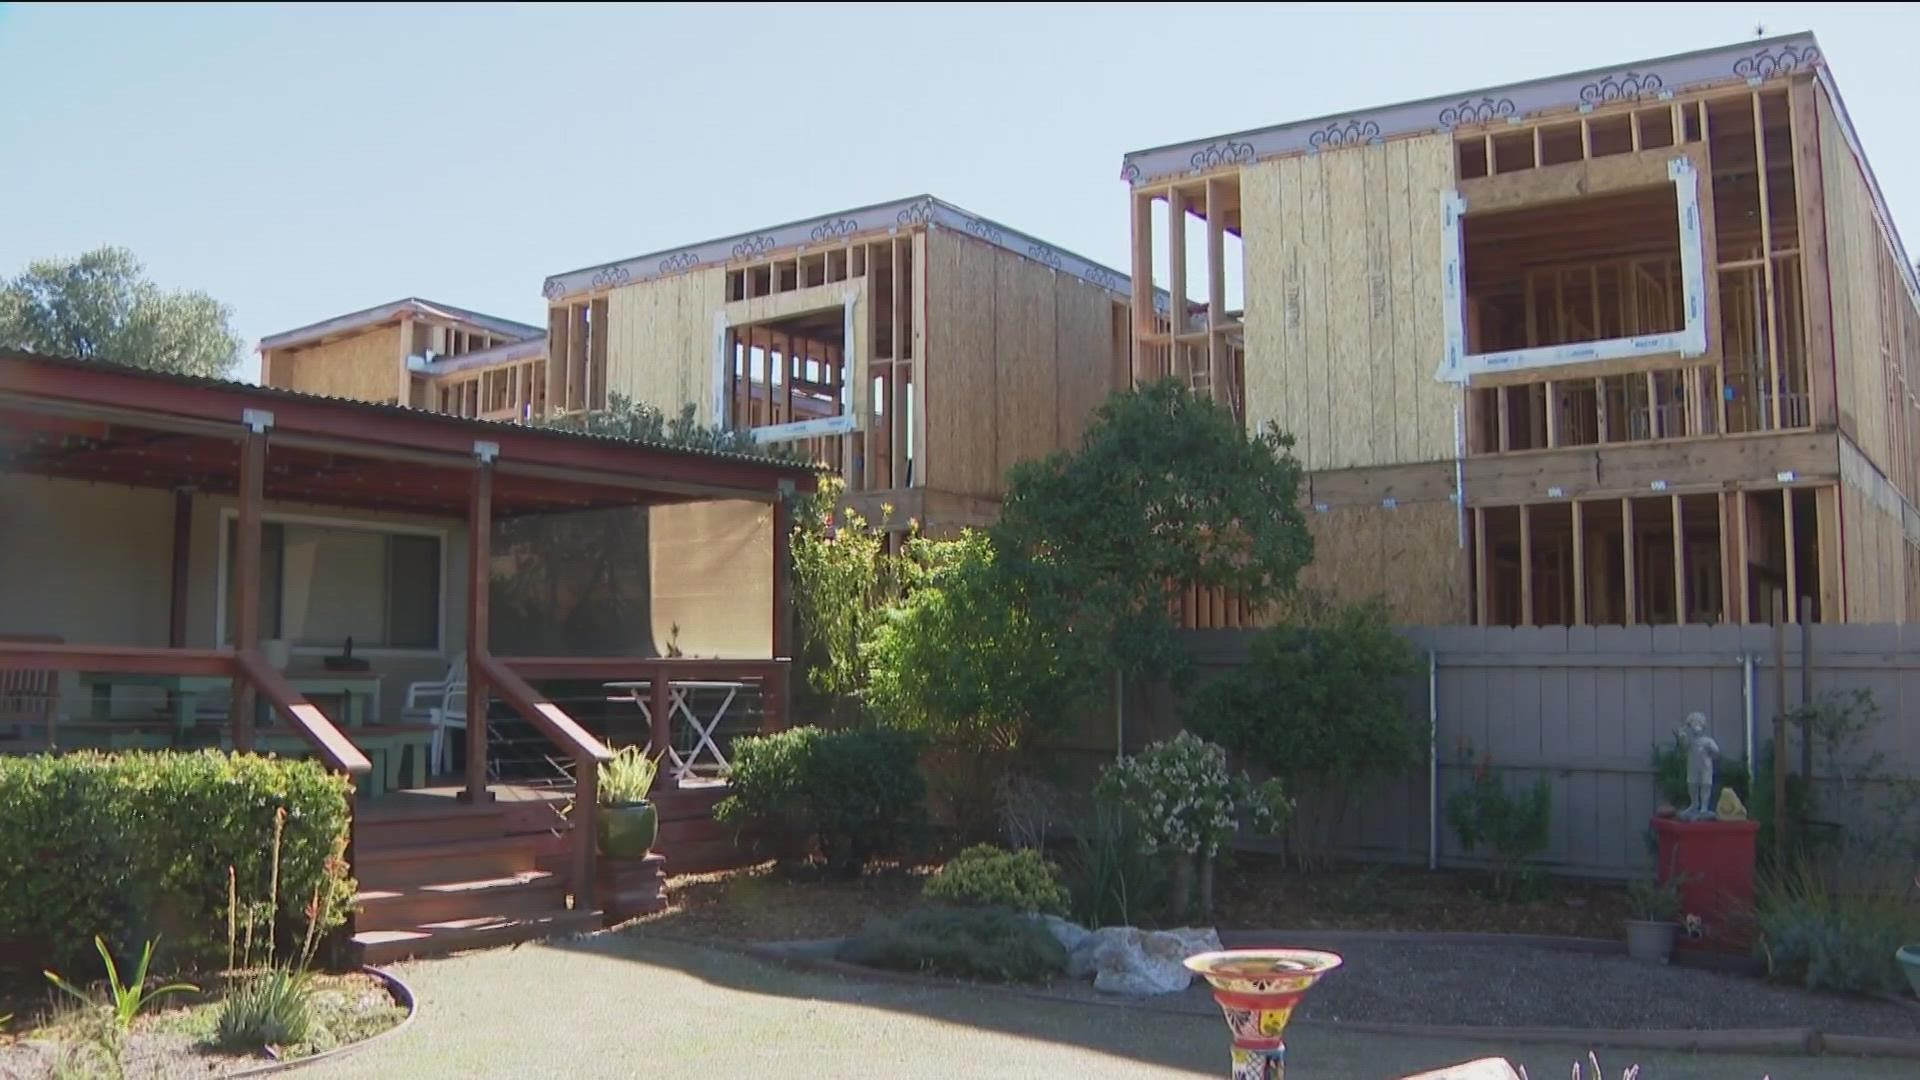 One local developer has purchased eight homes and built ADUs on the properties.